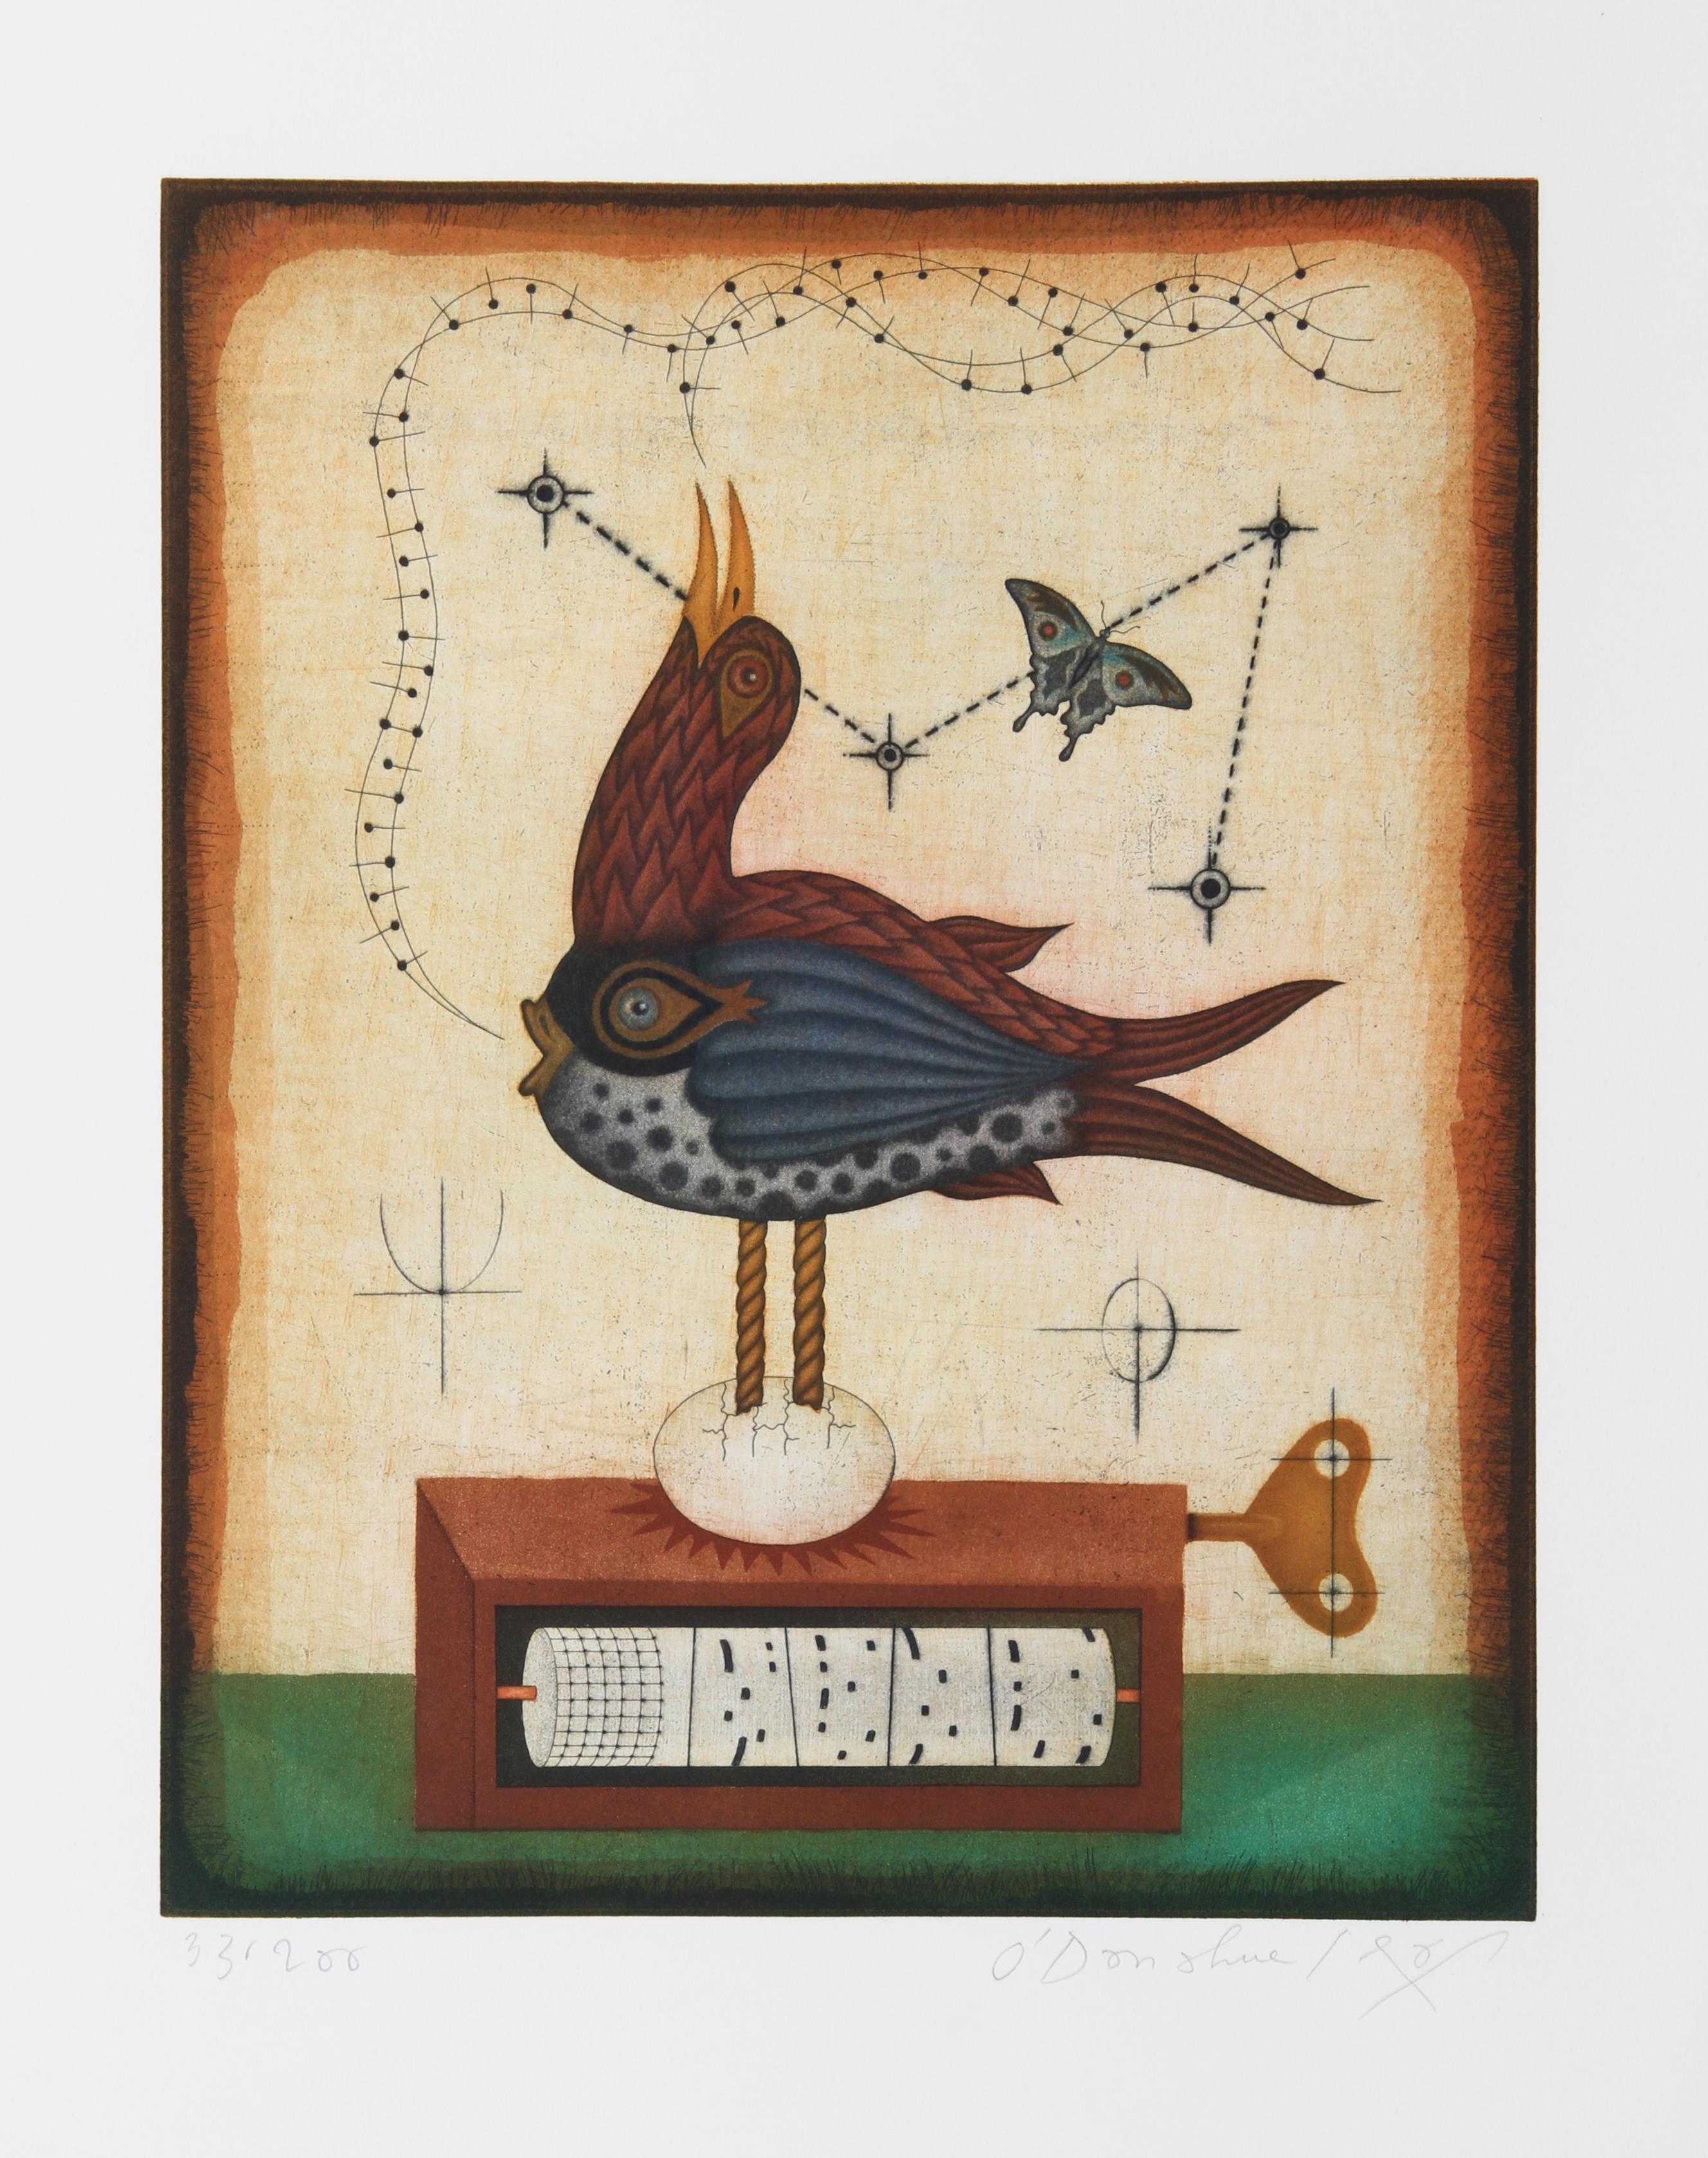 Music Box Bird
Tighe O’Donoghue, American (1942)
Date: circa 1980
Etching with Aquatint, signed and numbered in pencil
Edition of 200
Image Size: 20 x 15.5 inches
Size: 25.5 in. x 20 in. (64.77 cm x 50.8 cm)